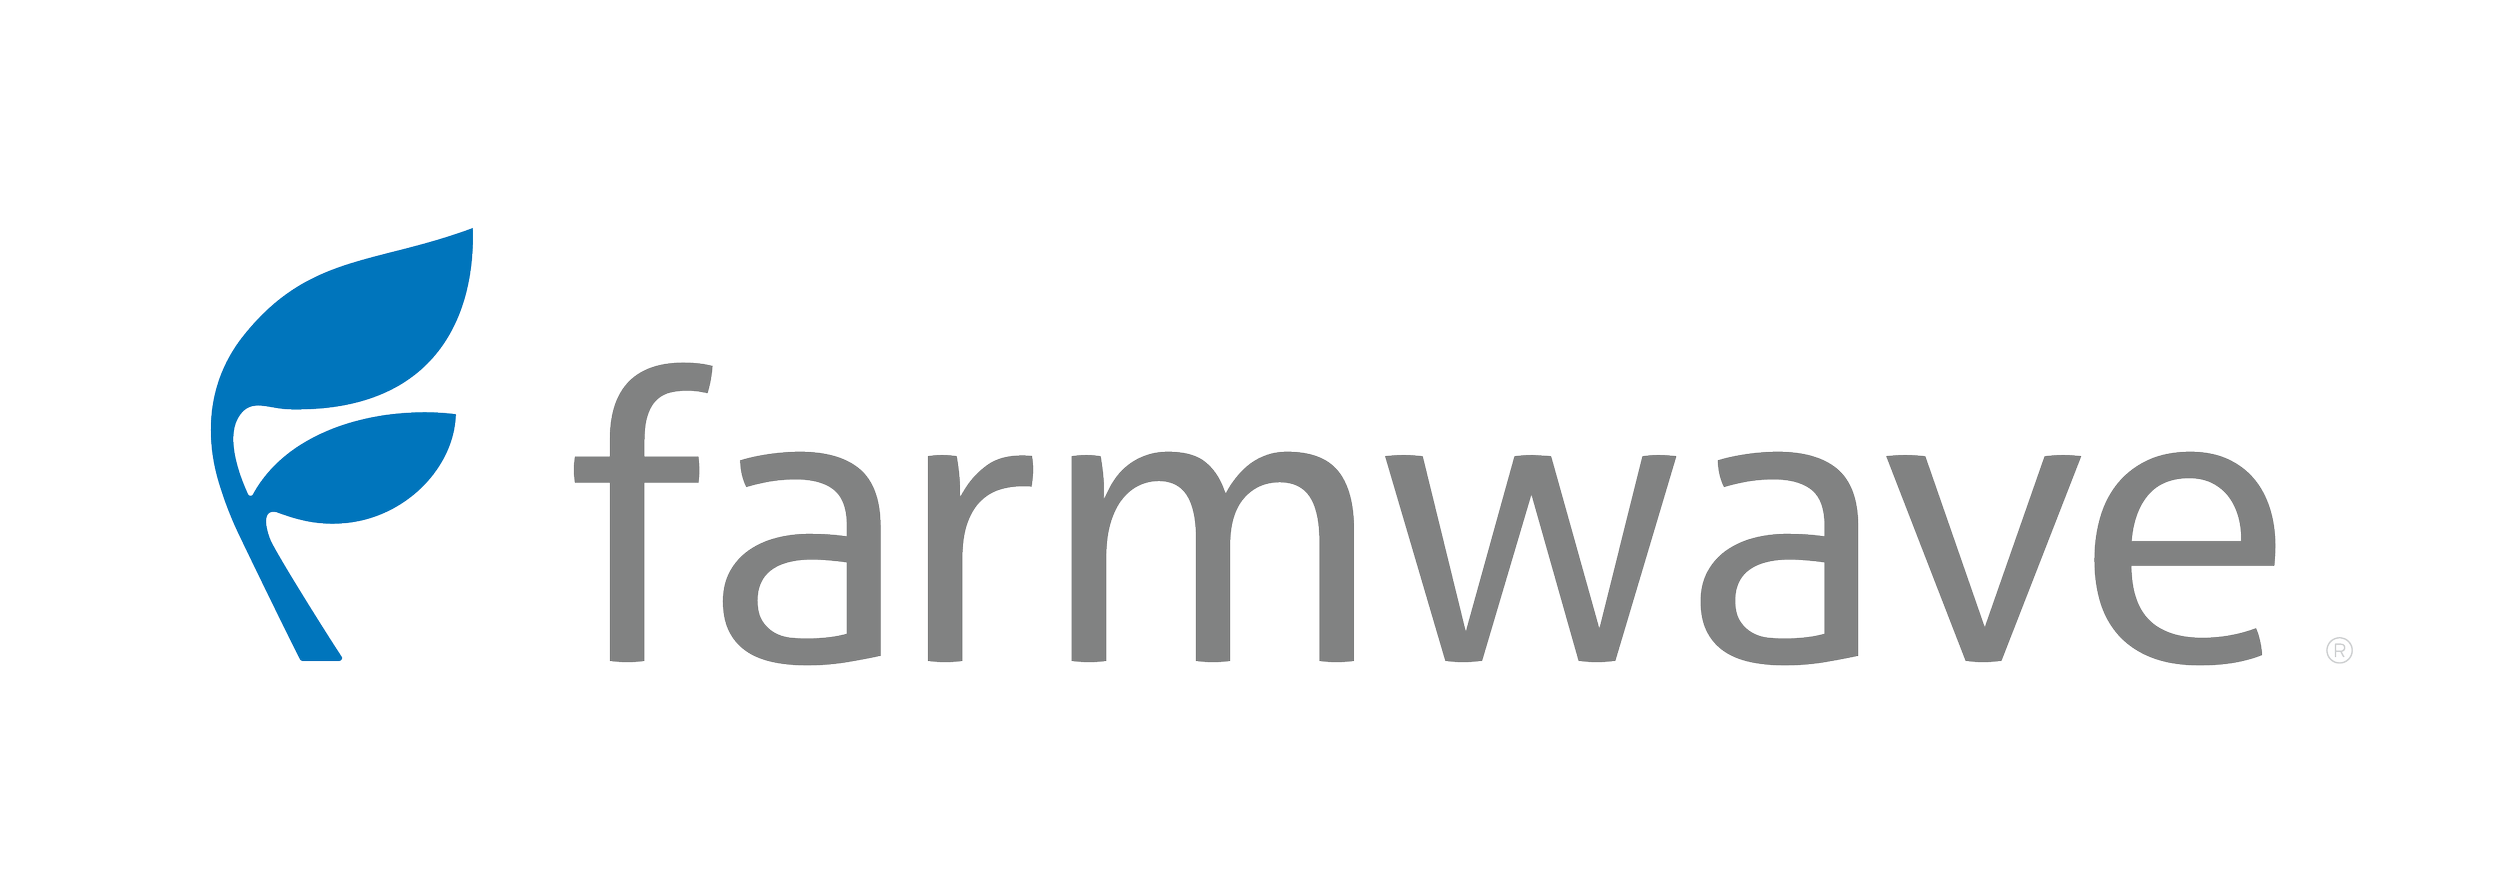 farmwave logo with blue sprout